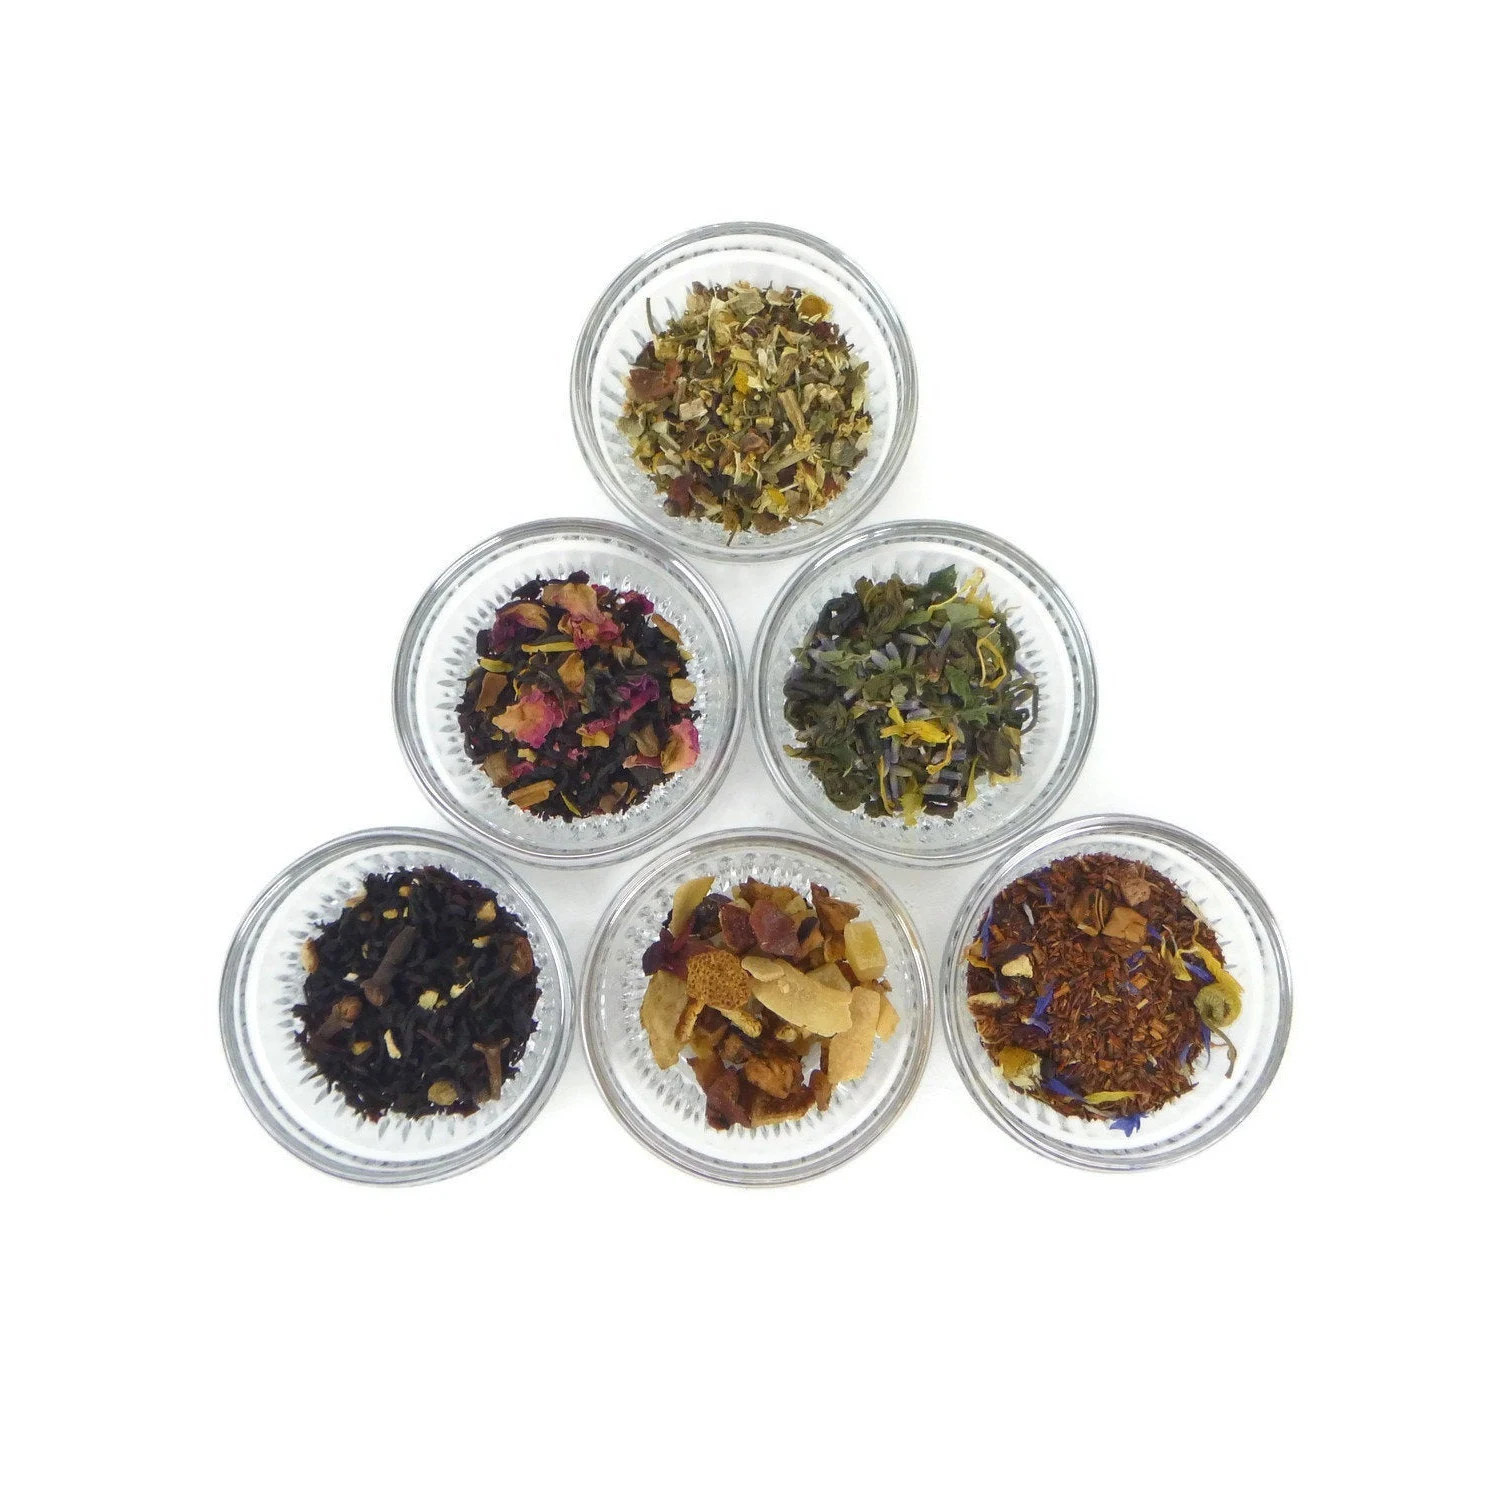 Which tea variety is most popular in Western countries?